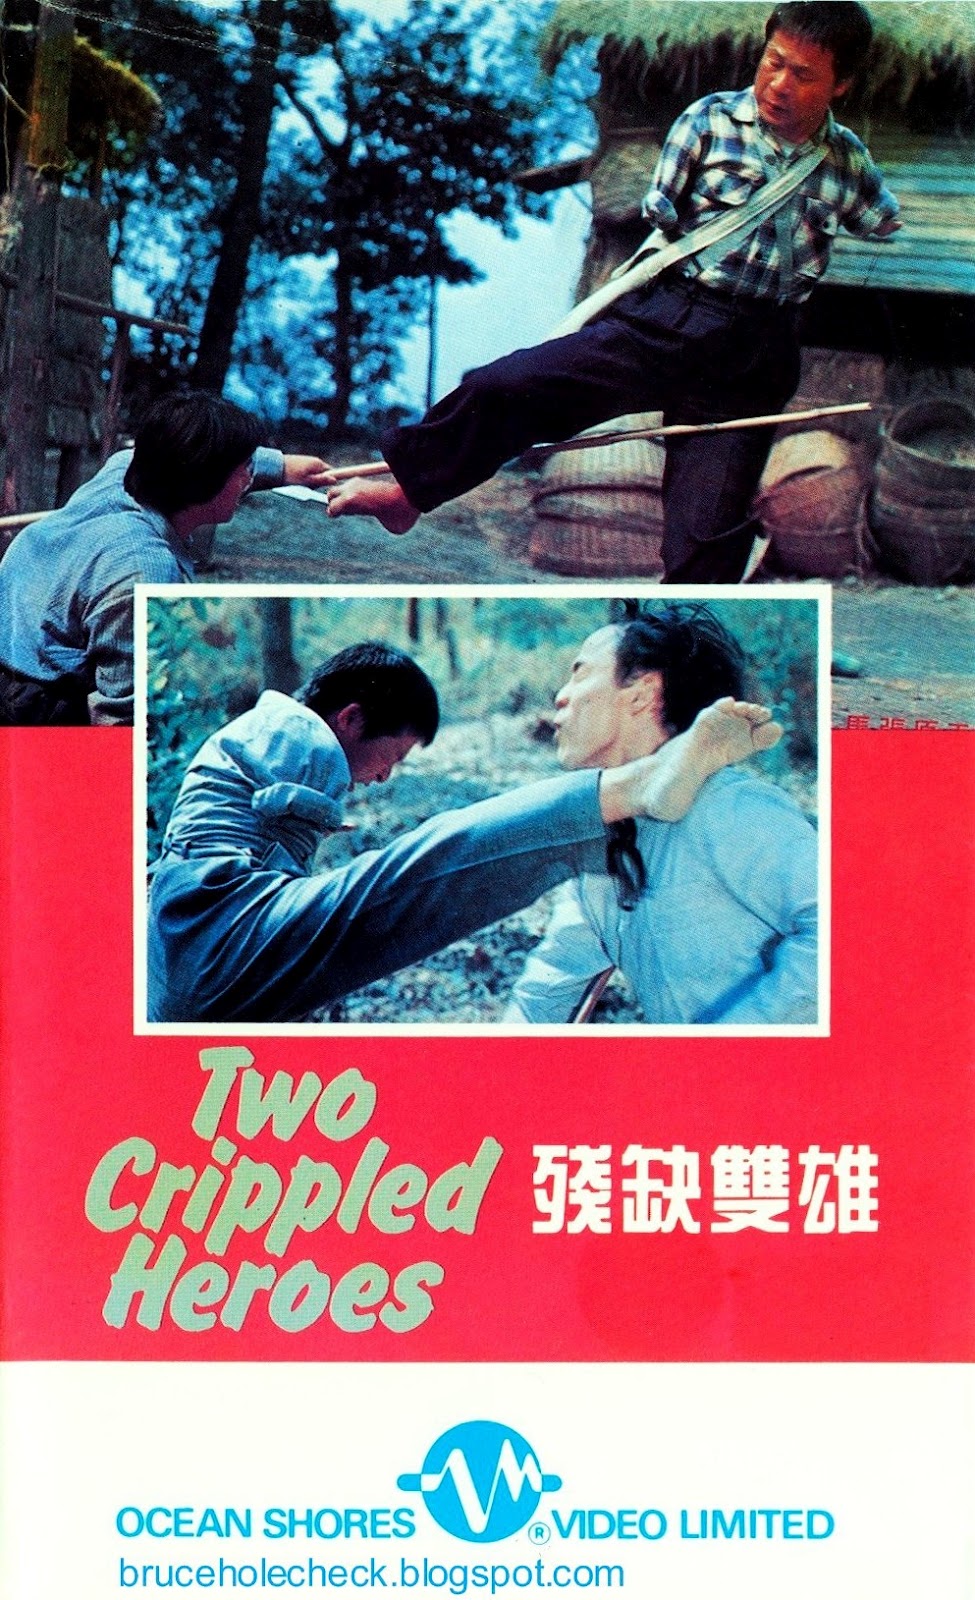 Crippled Heroes (1980) with English Subtitles on DVD on DVD